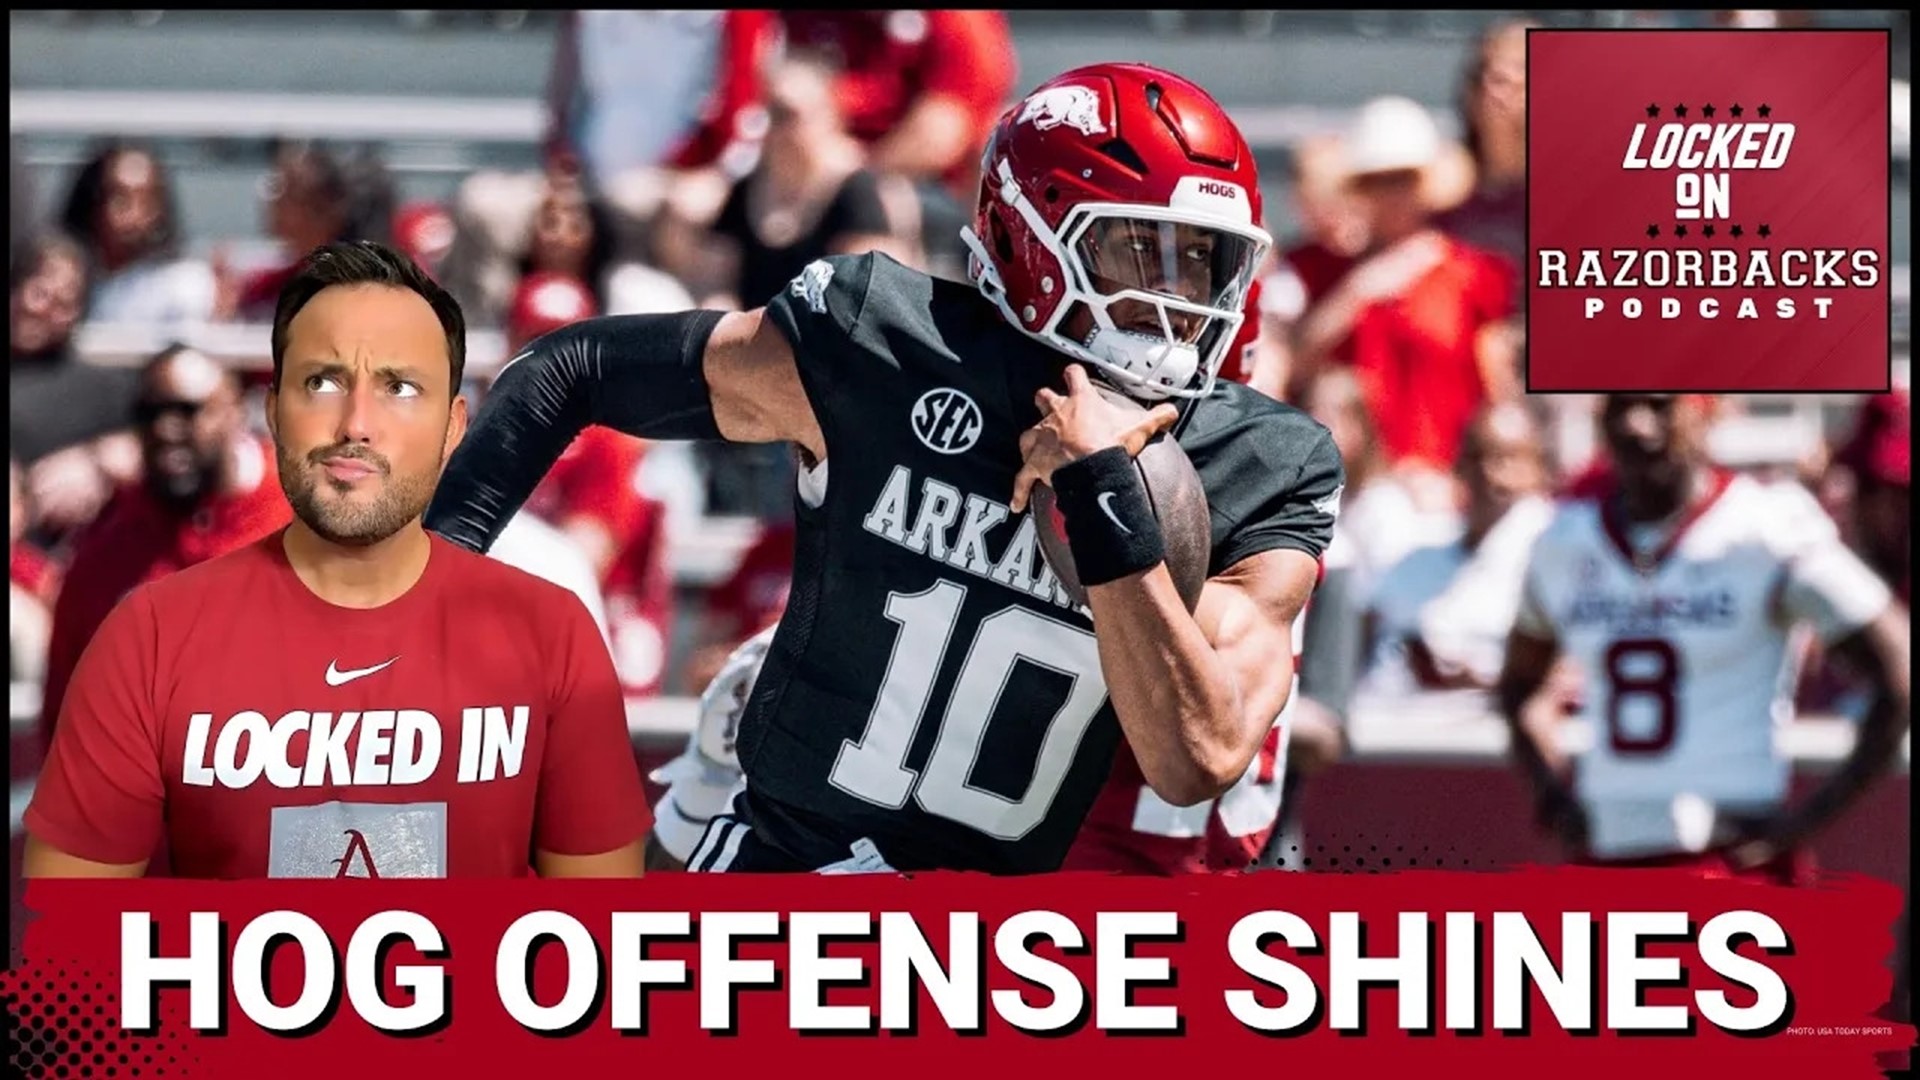 Arkansas had their final spring practice for their Spring Game on Saturday. How good did the overall team look especially offensively?